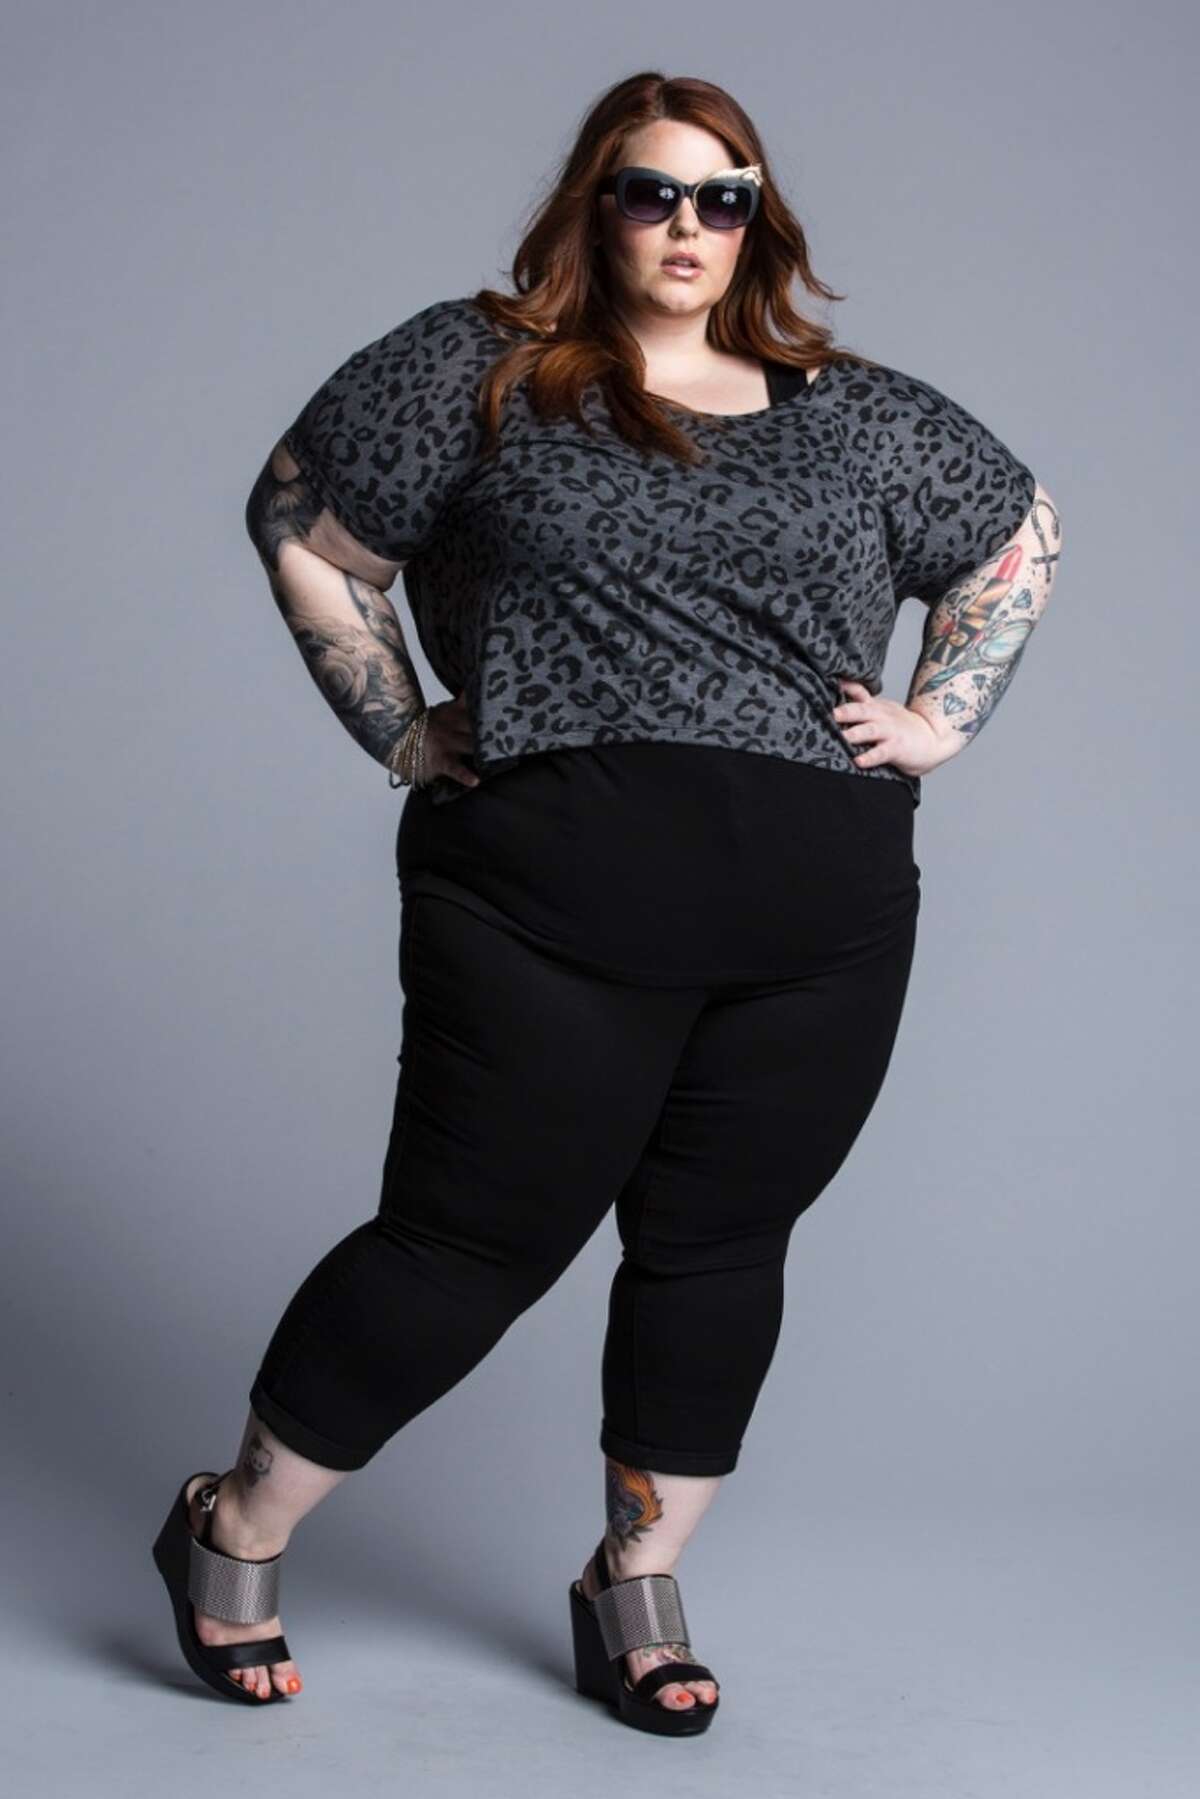 Tess Holliday is the face of Torrid's spring 2015 line